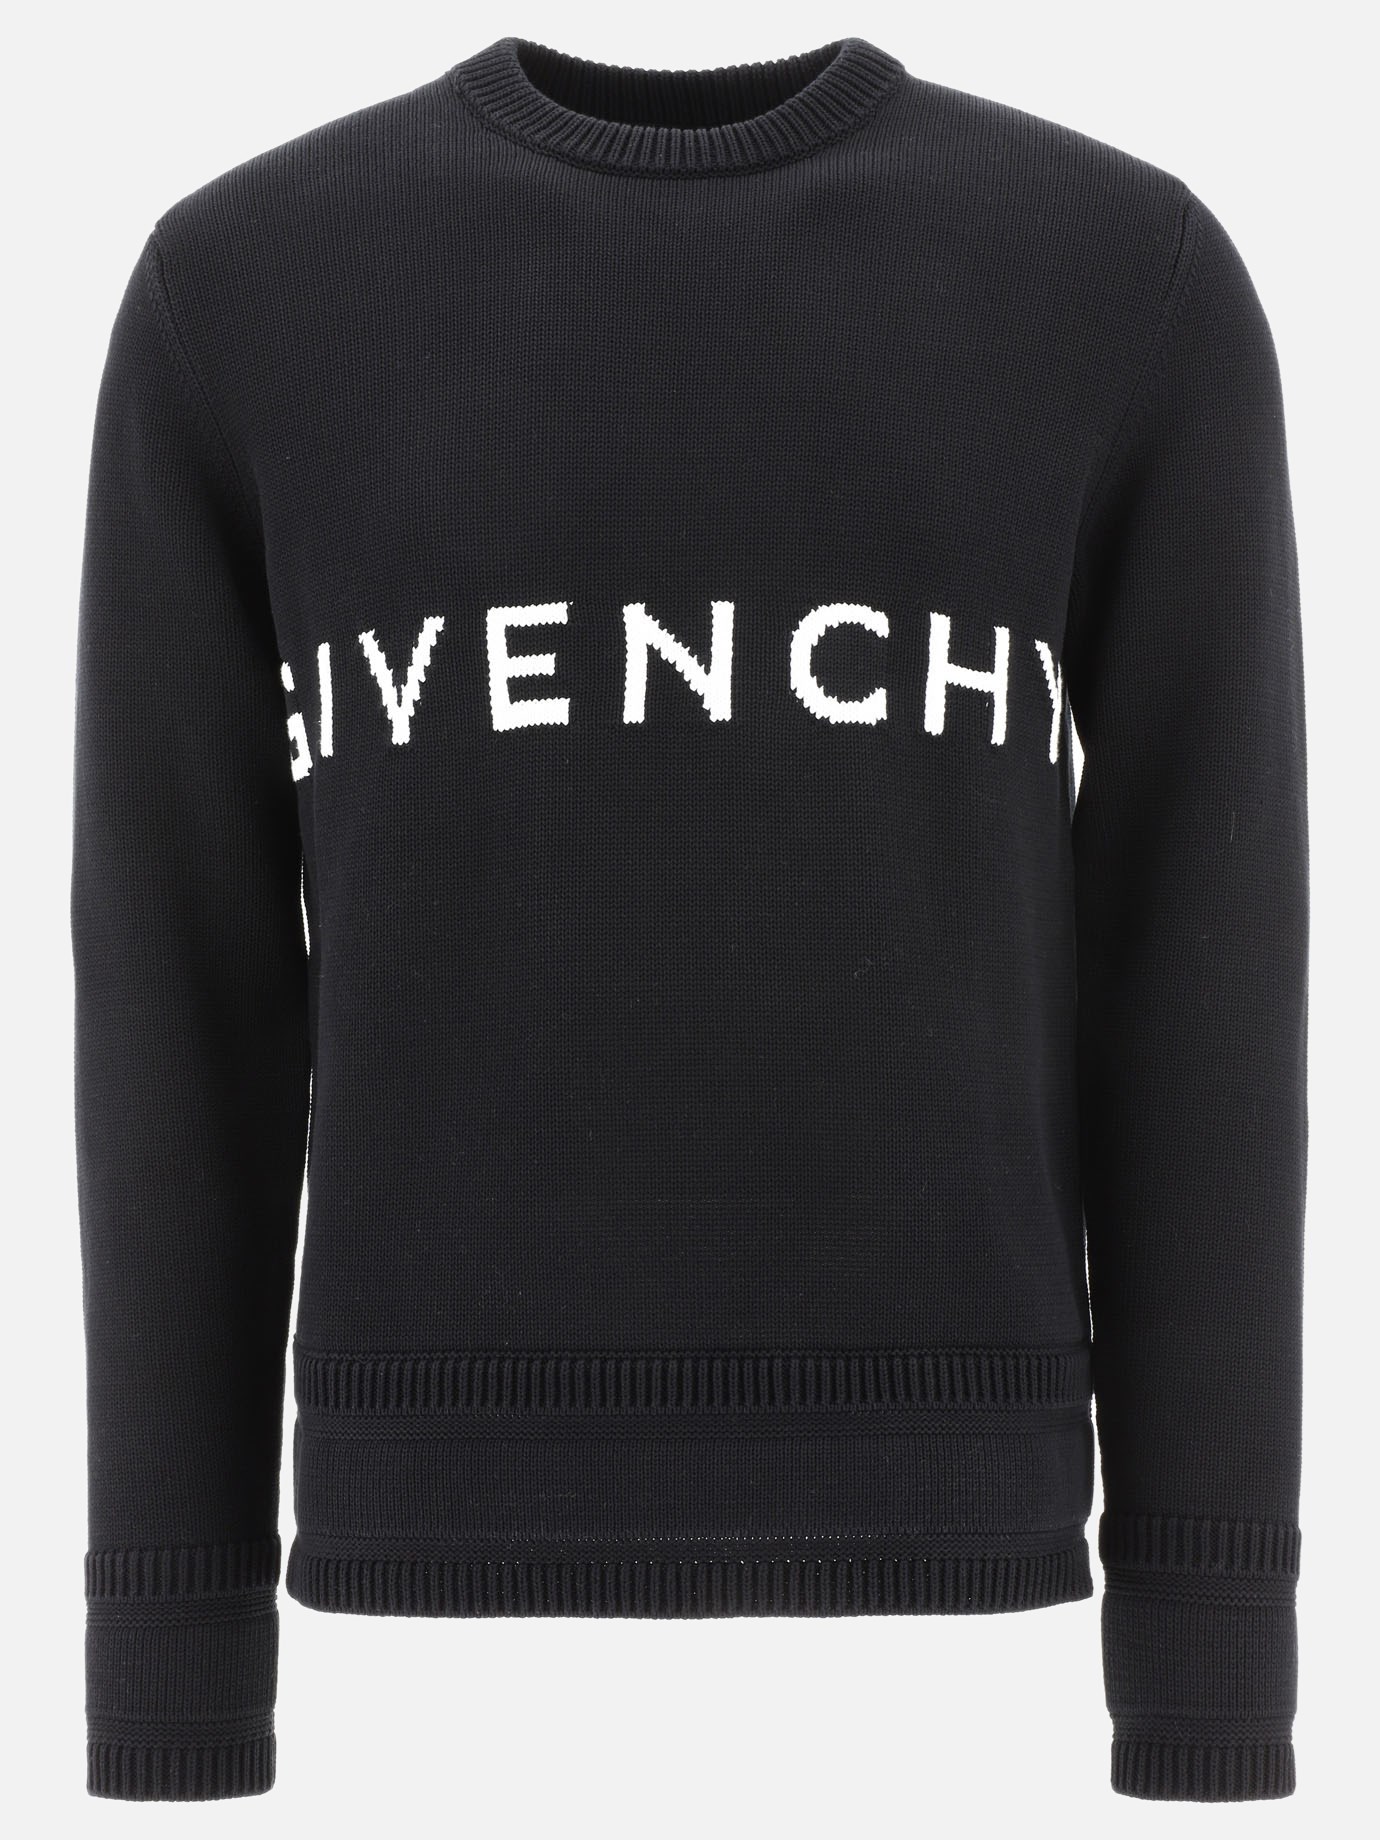  Givenchy  pullover by Givenchy